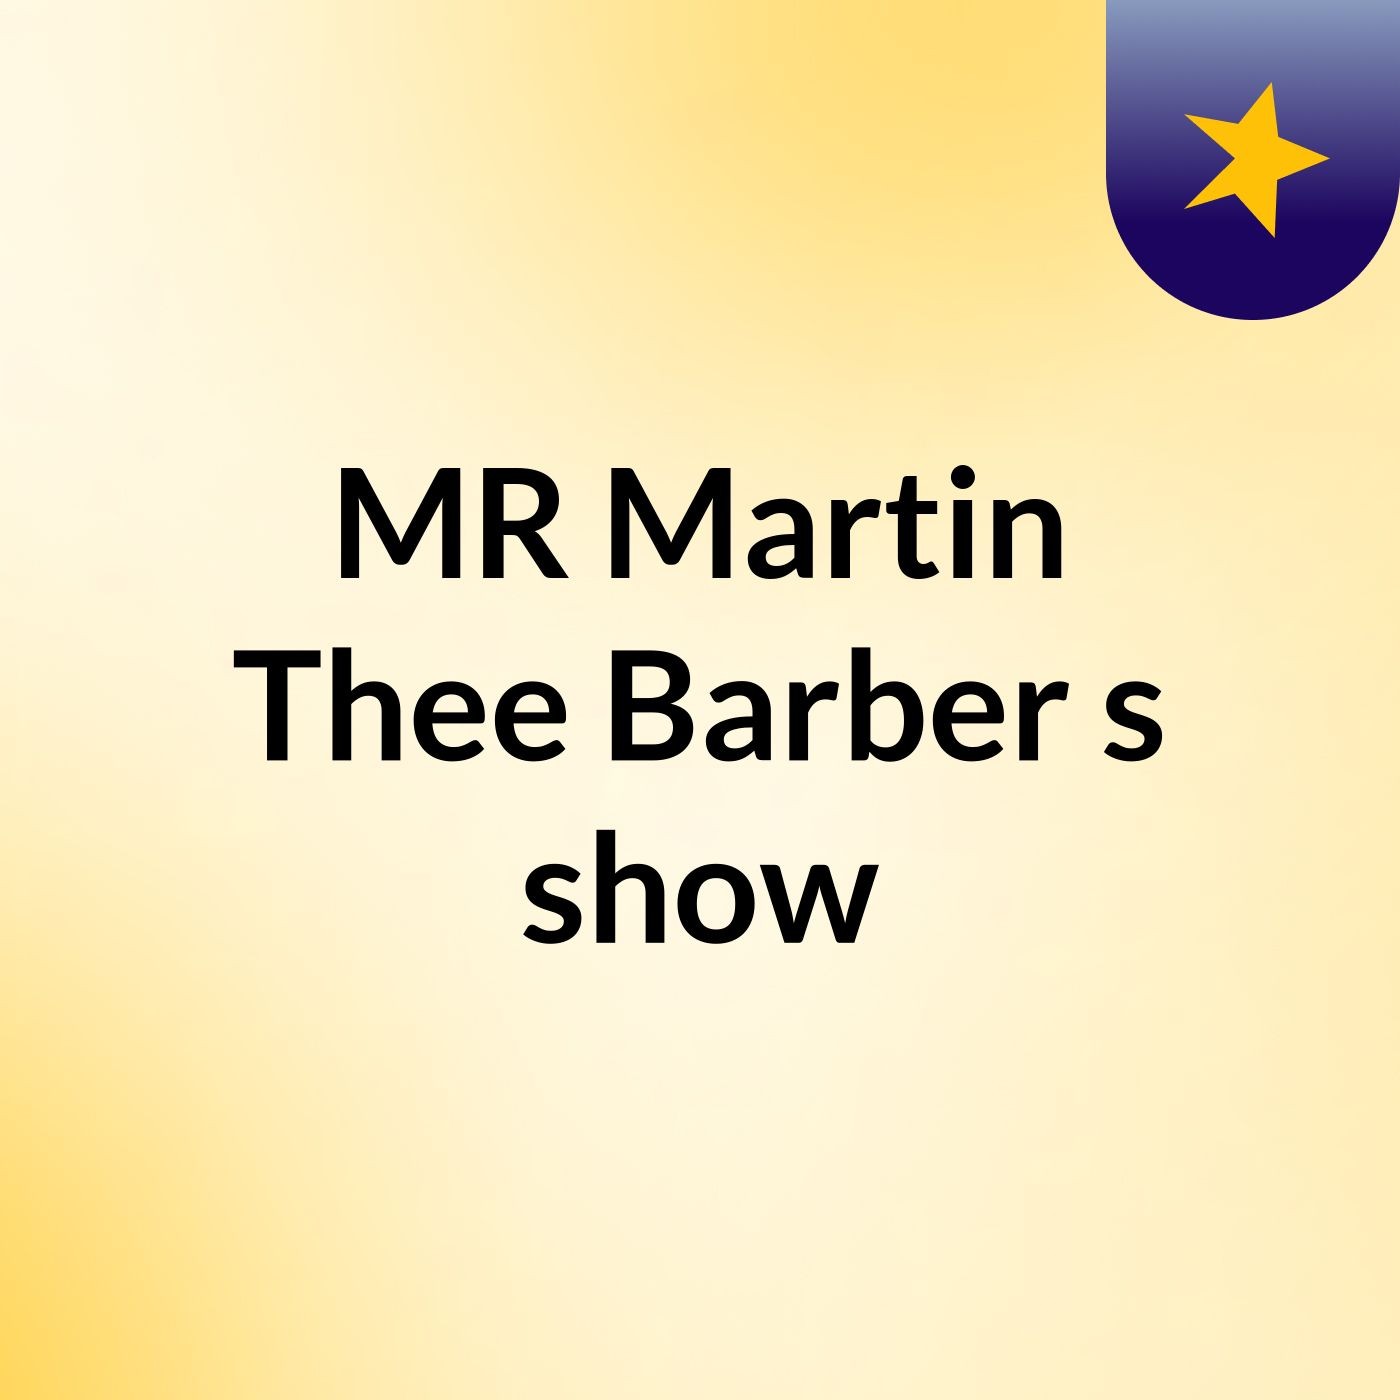 MR'Martin Thee Barber's show